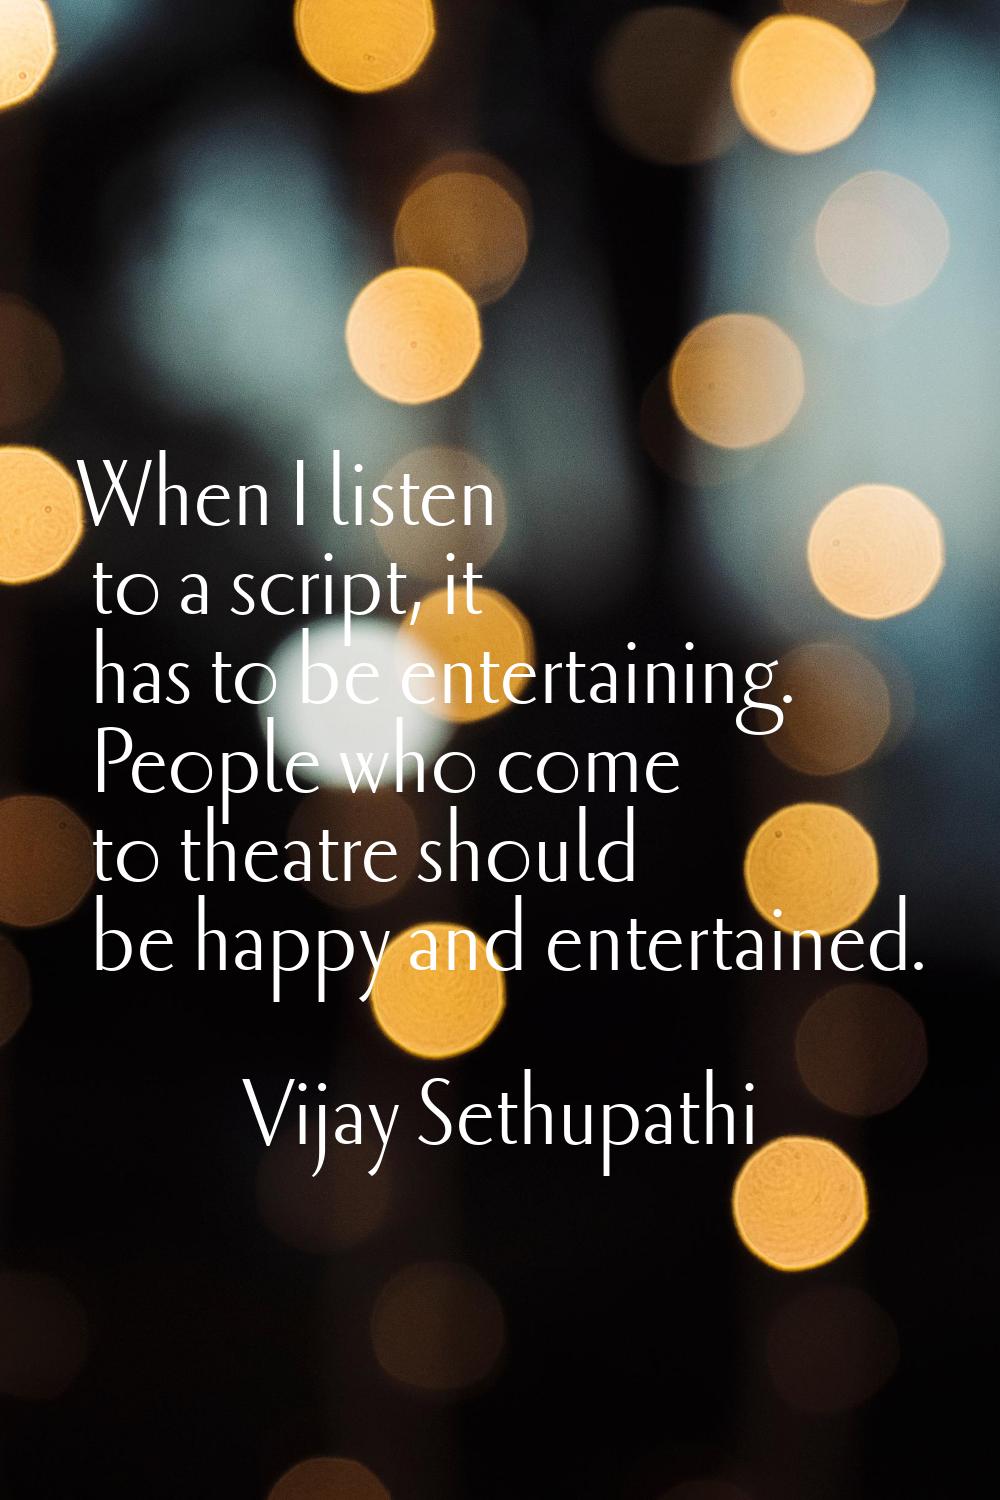 When I listen to a script, it has to be entertaining. People who come to theatre should be happy an